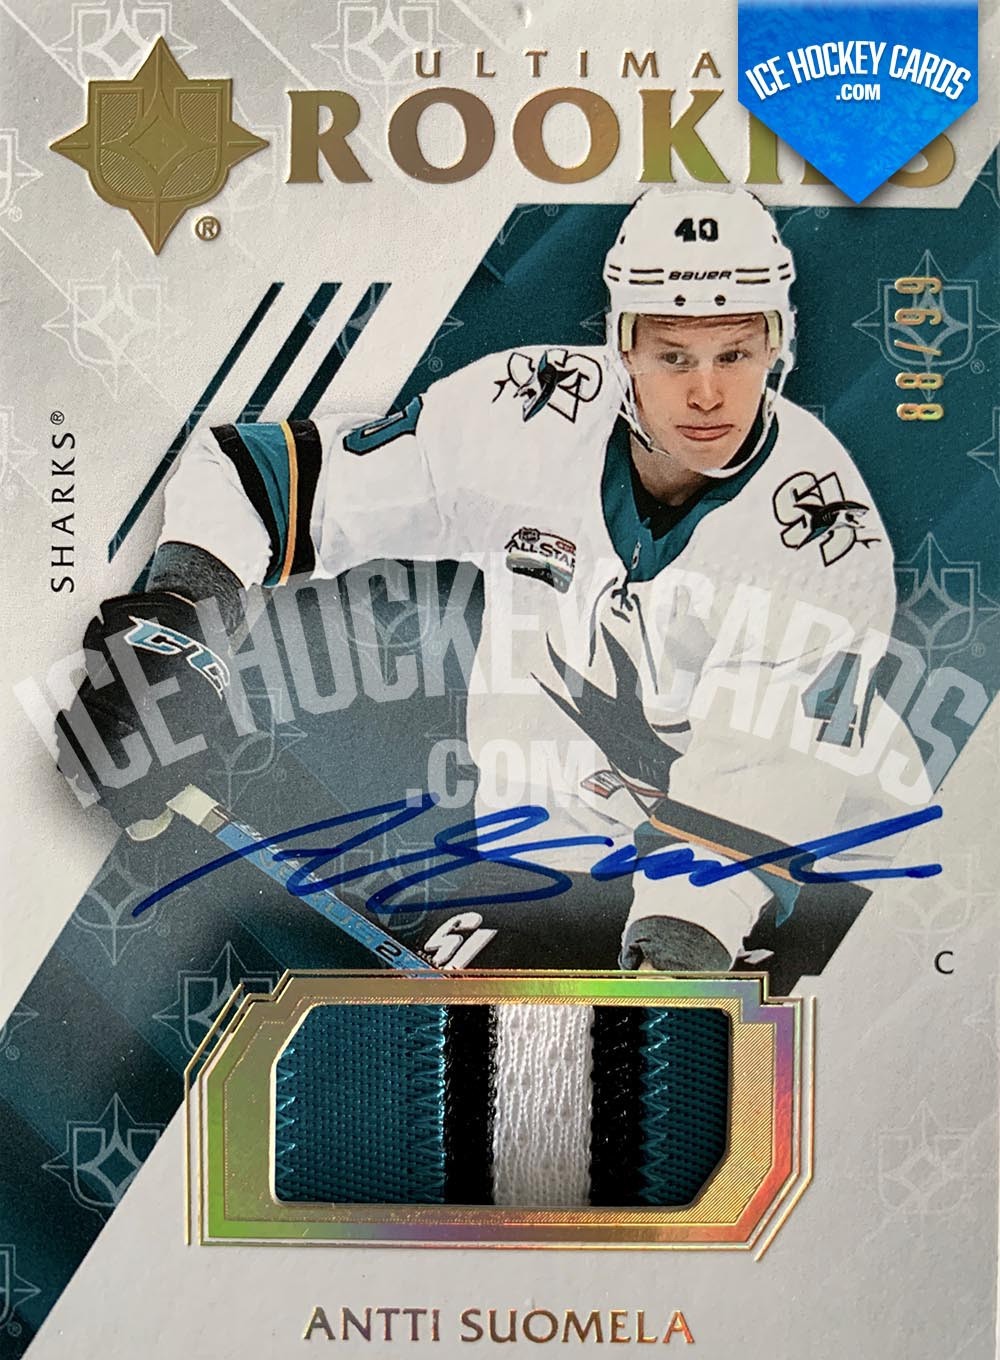 Upper Deck - Ultimate Collection 2018-19 - Antti Suomela Ultimate Rookies Auto Patch Card RARE